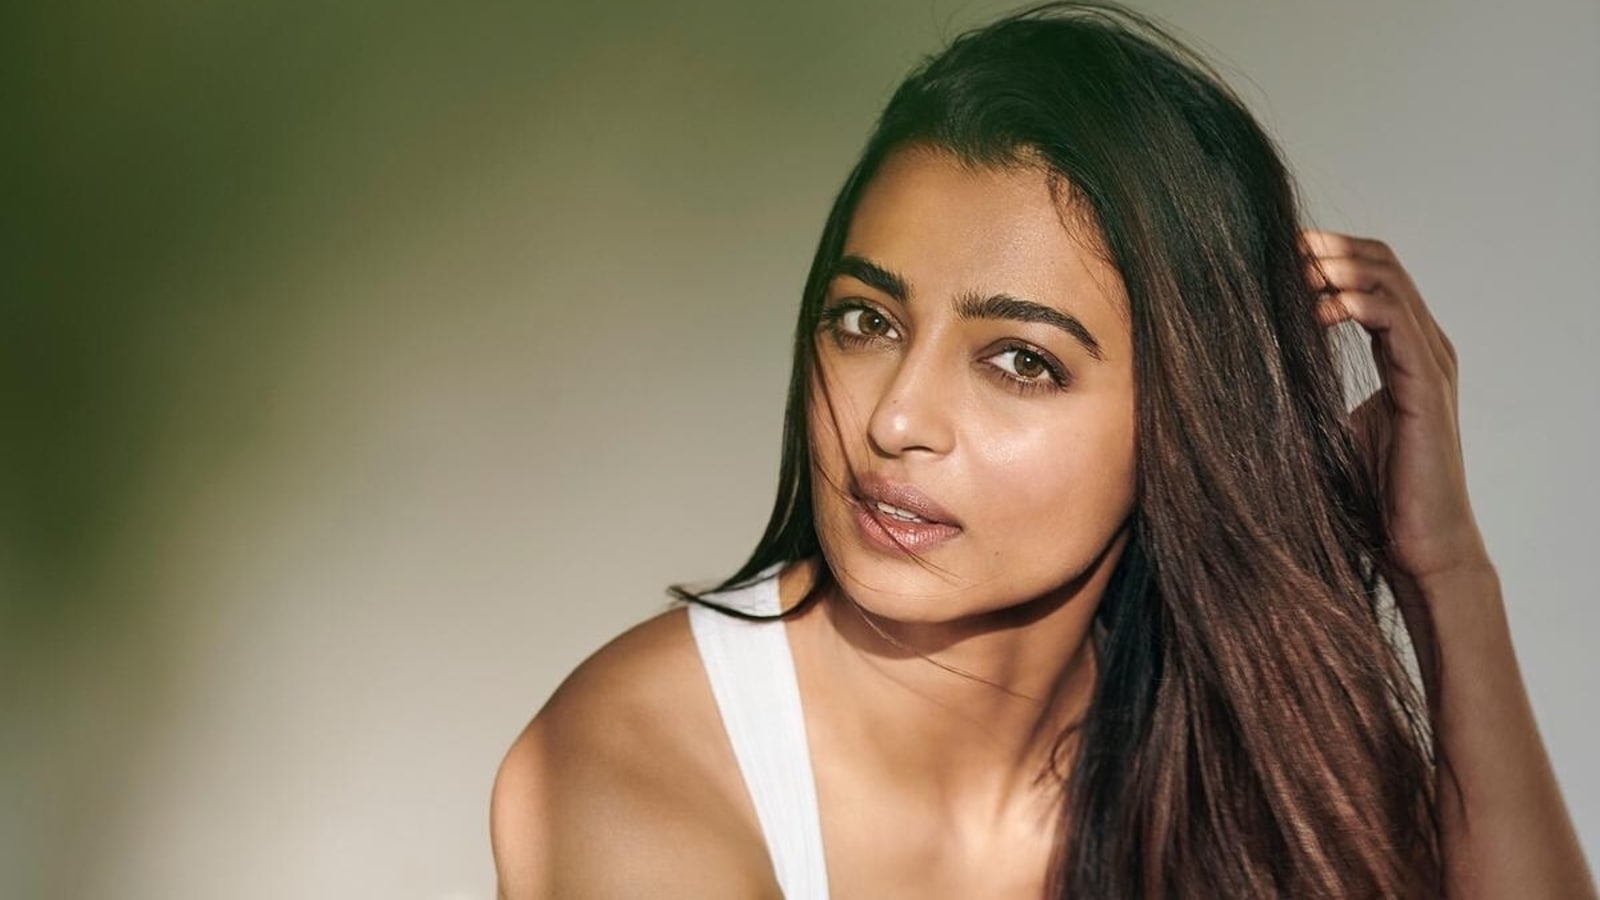 Radhika Apte says she was 'pressured' to get plastic surgeries after film  debut | Bollywood - Hindustan Times